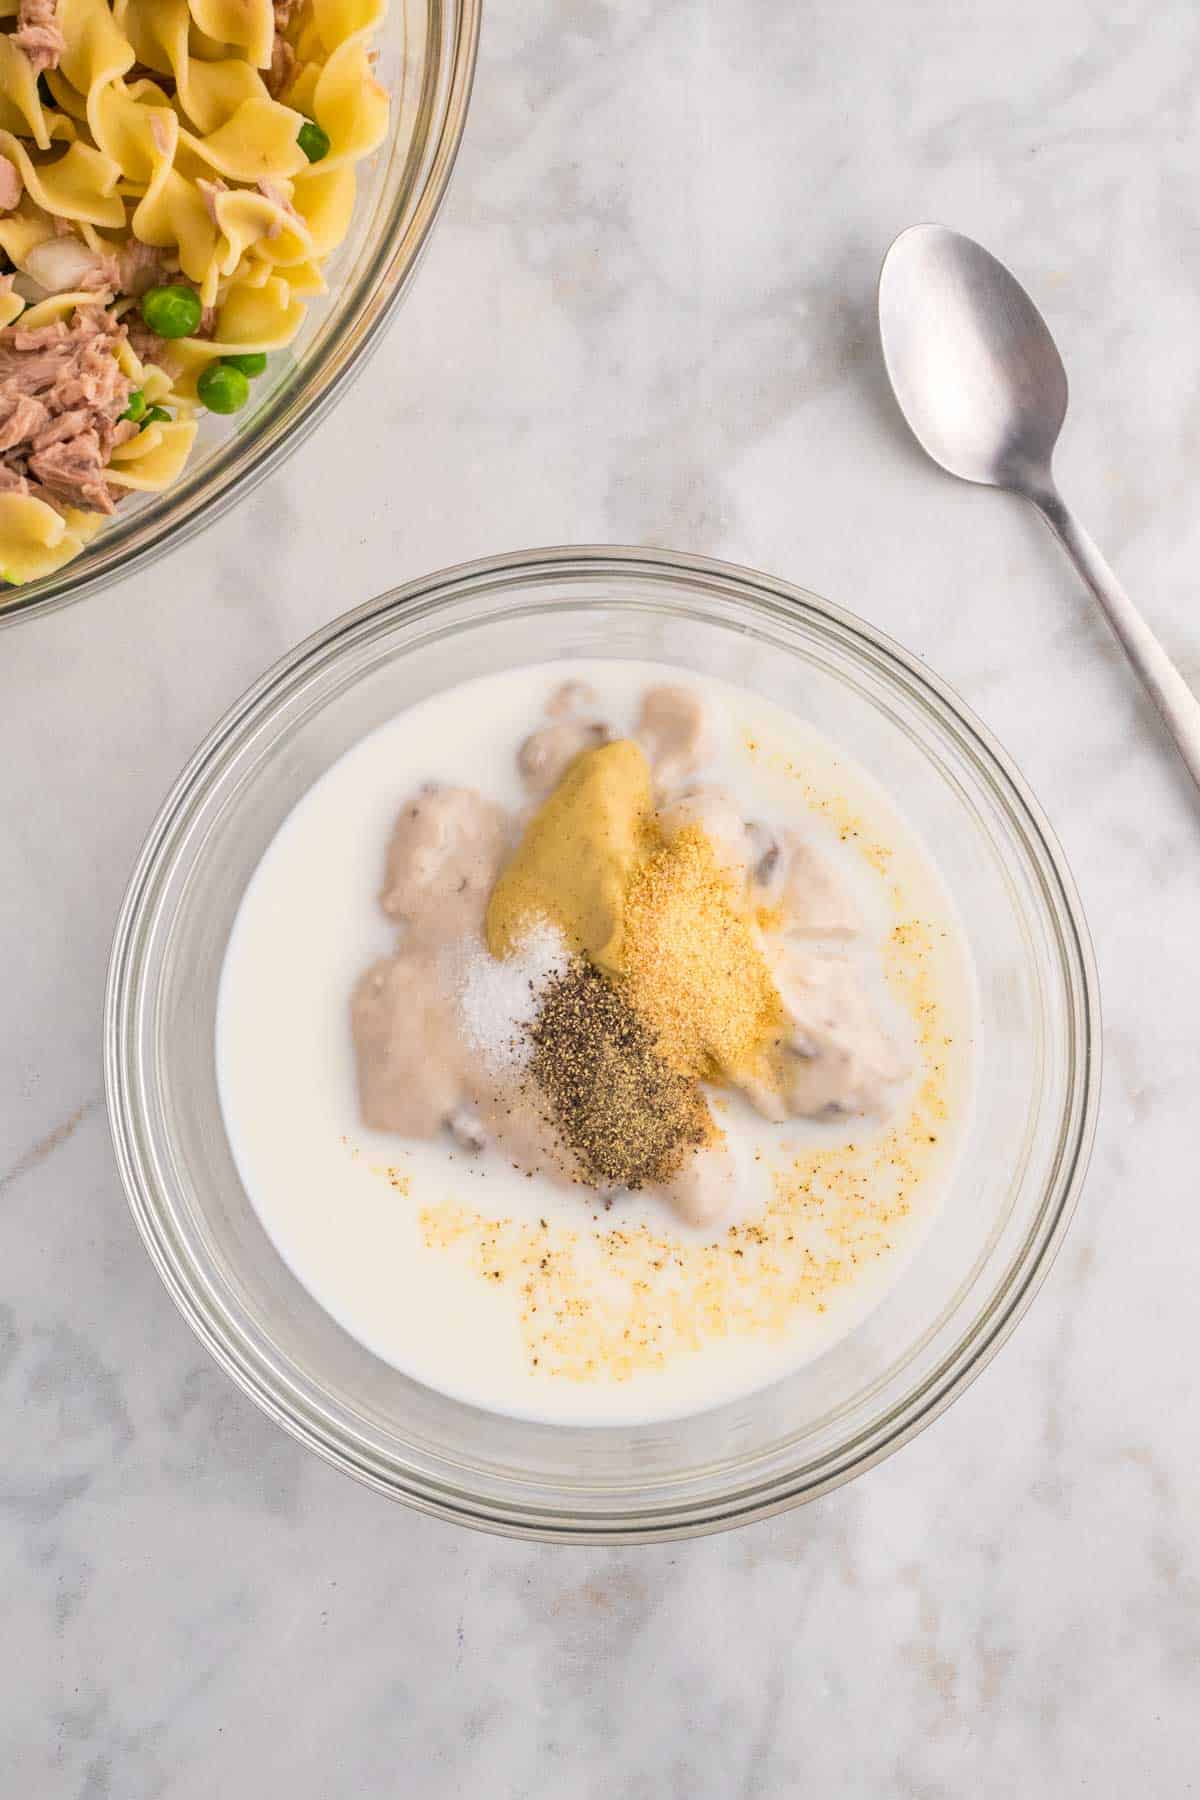 milk, cream of mushroom soup, Dijon mustard and spices in a bowl